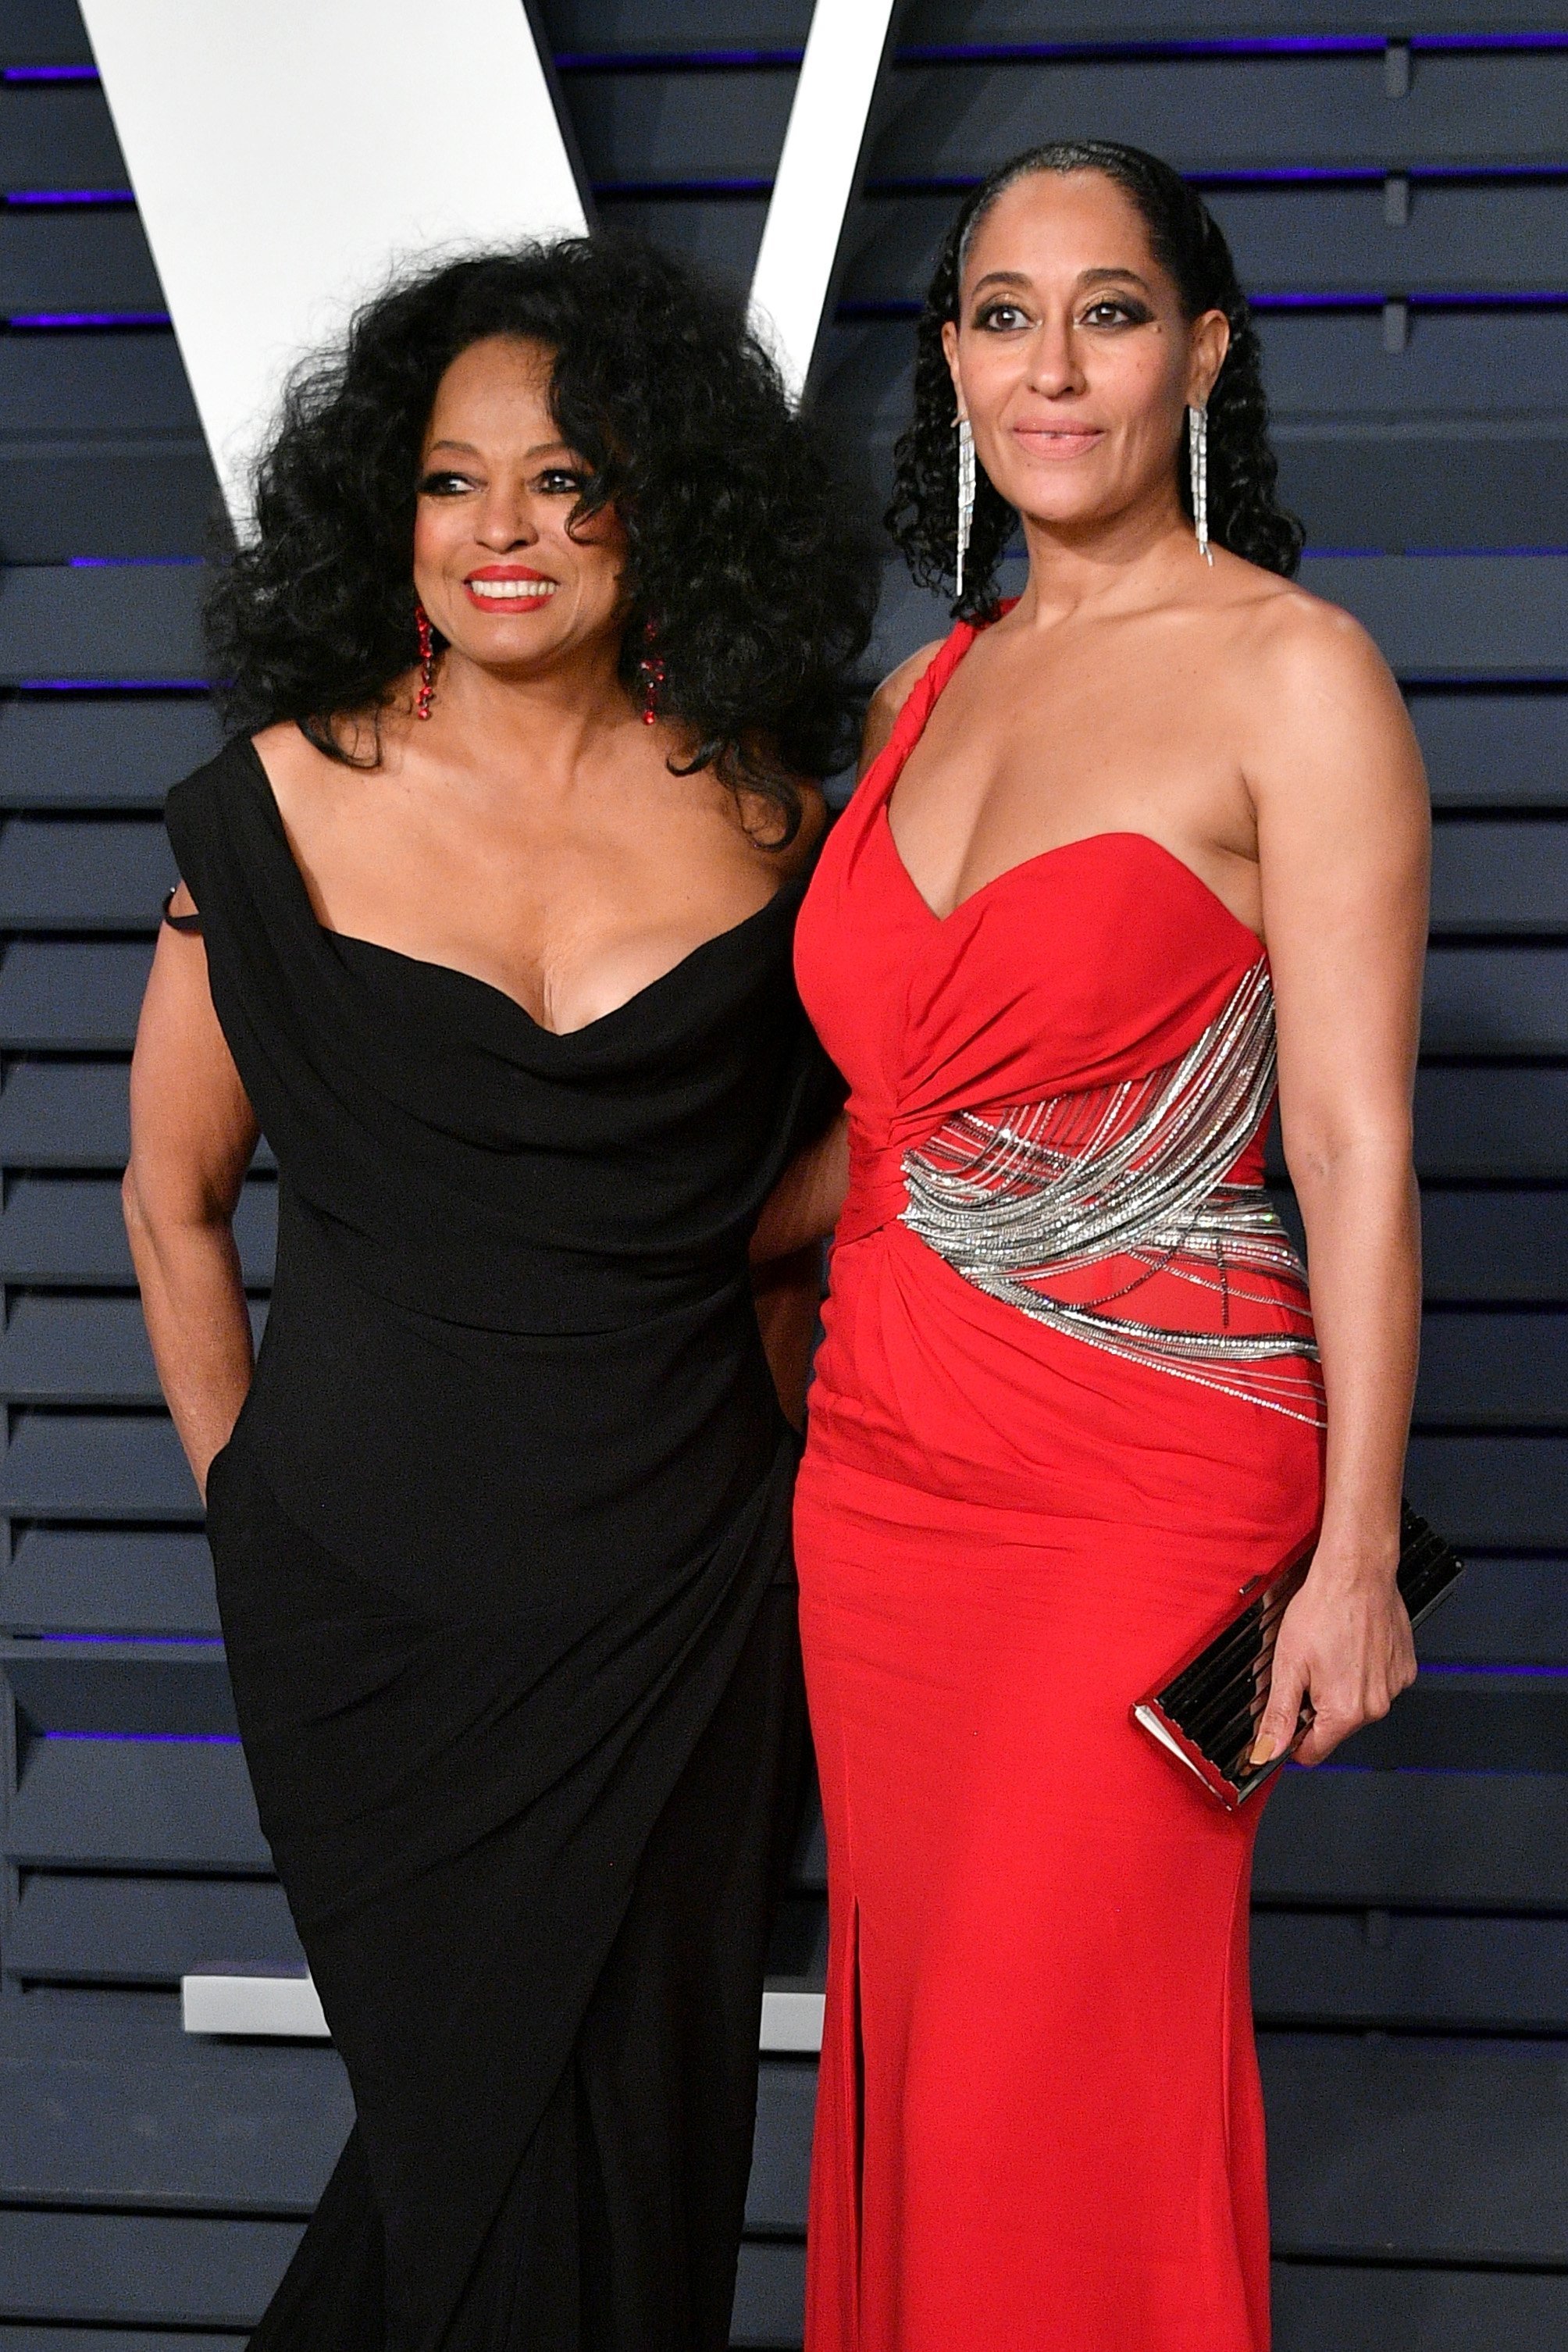 Diana Ross & Tracee Ellis Ross at the Vanity Fair Oscar Party on Feb. 24, 2019 in California | Photo: Getty Images